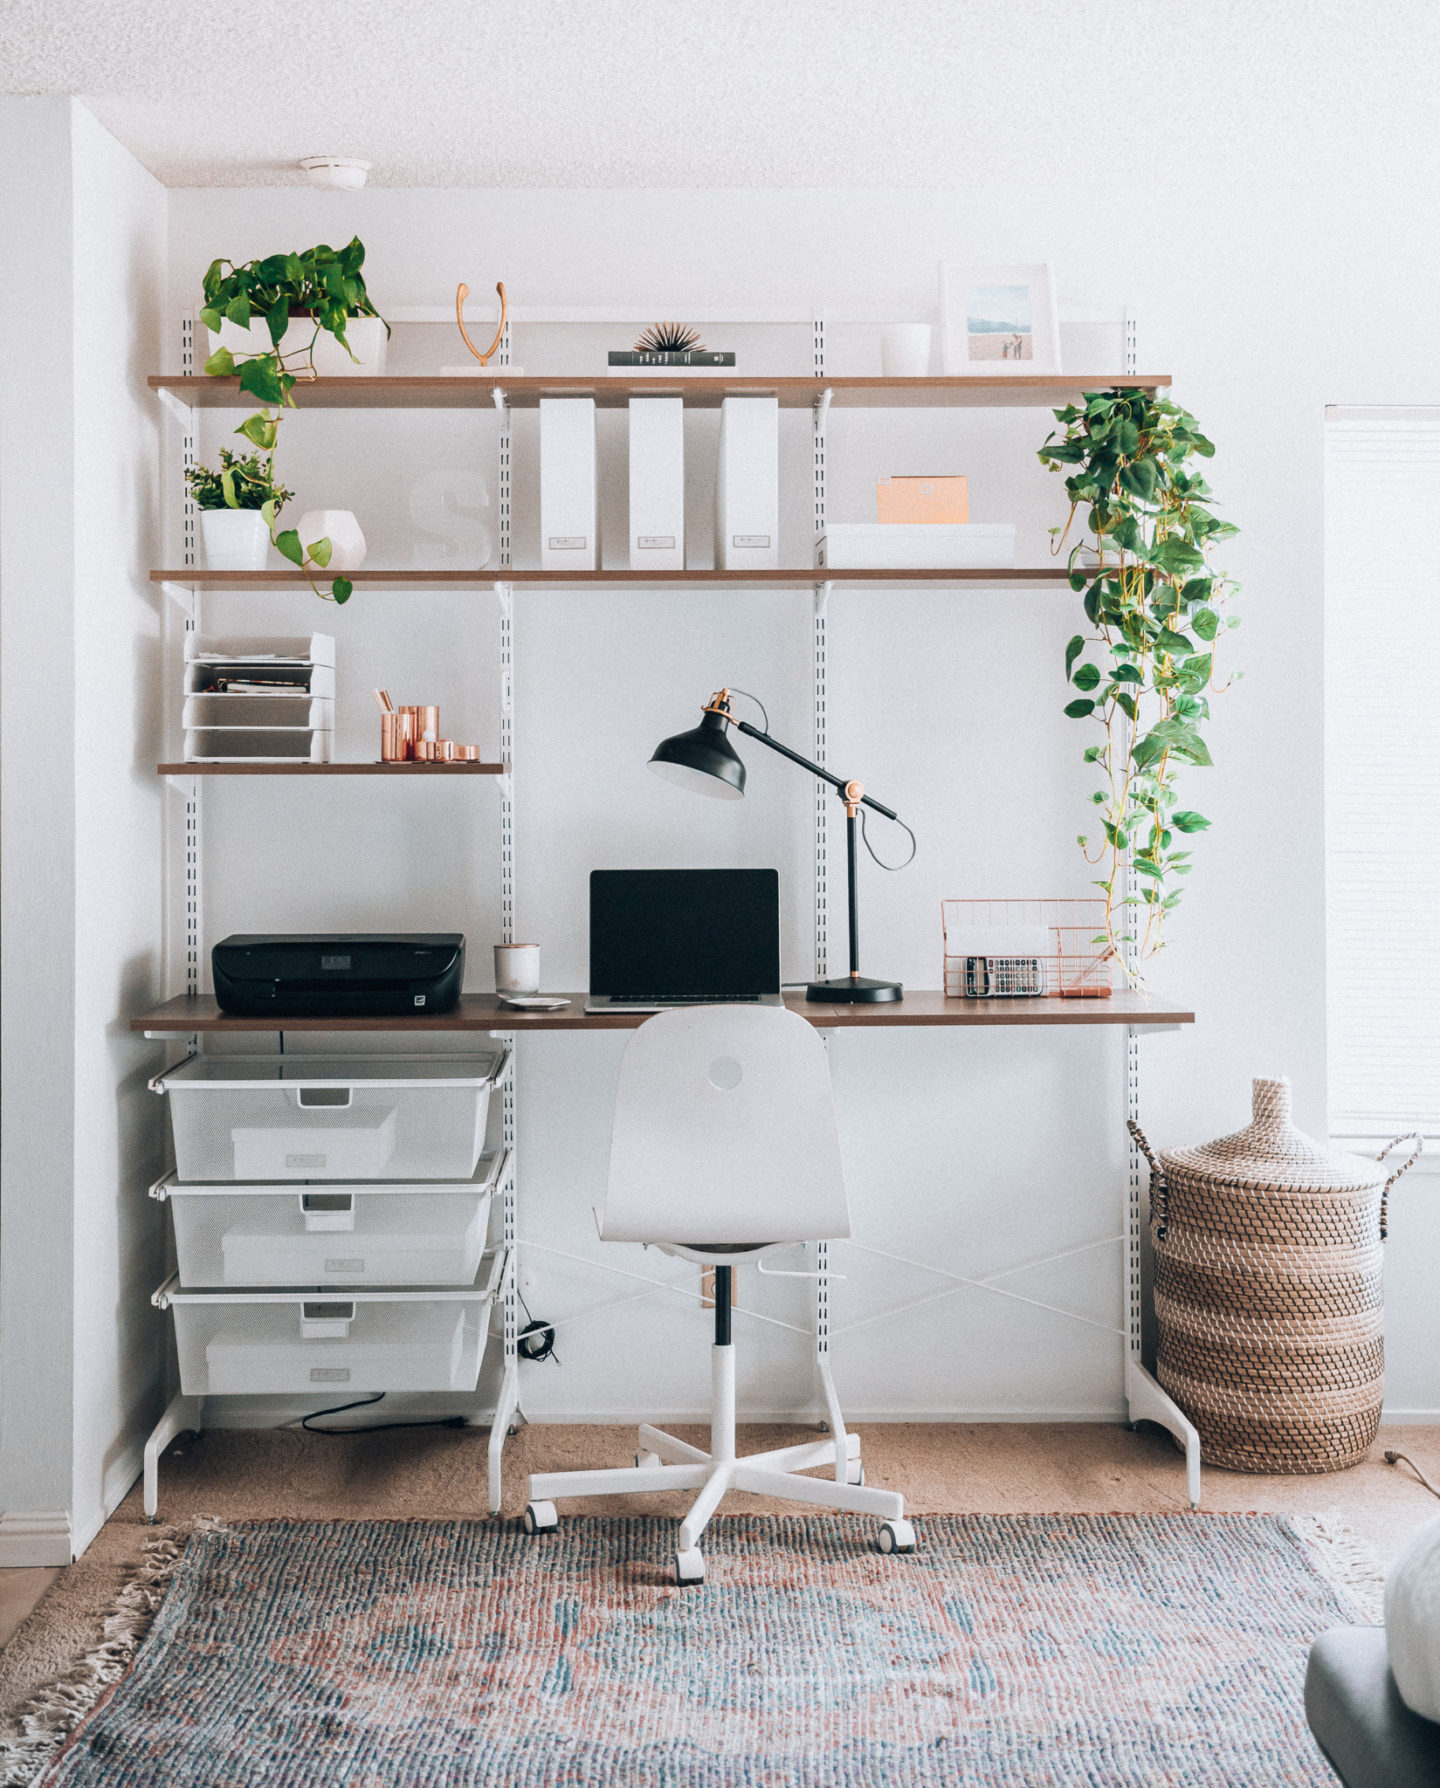 what to use for a modern minimalist home office space. www.thegirlintheyellowdress.com